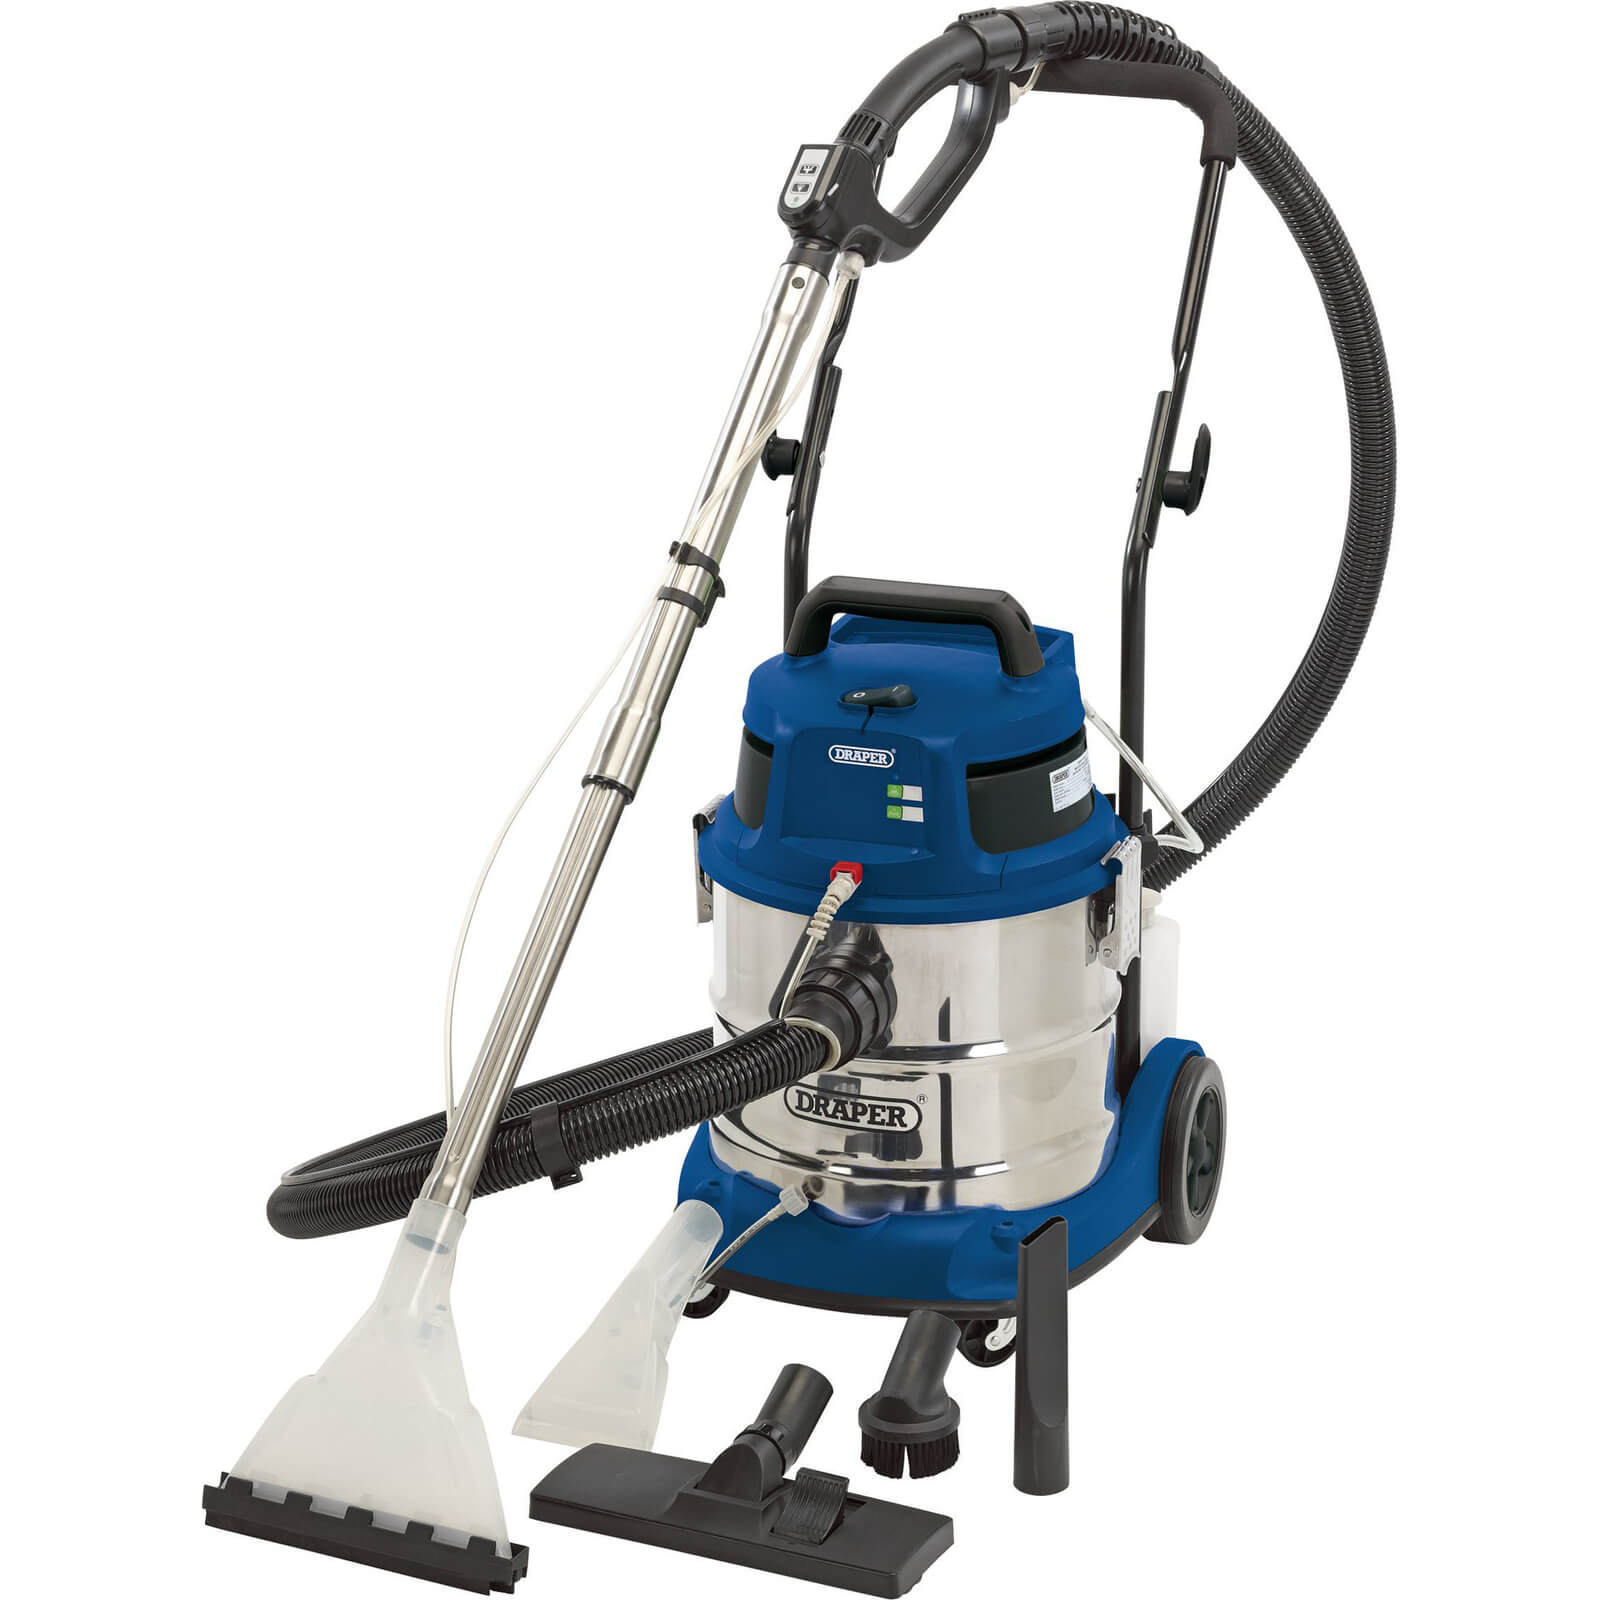 Image of Draper SWD1500 Wet and Dry Shampoo Vacuum Cleaner 20L 240v